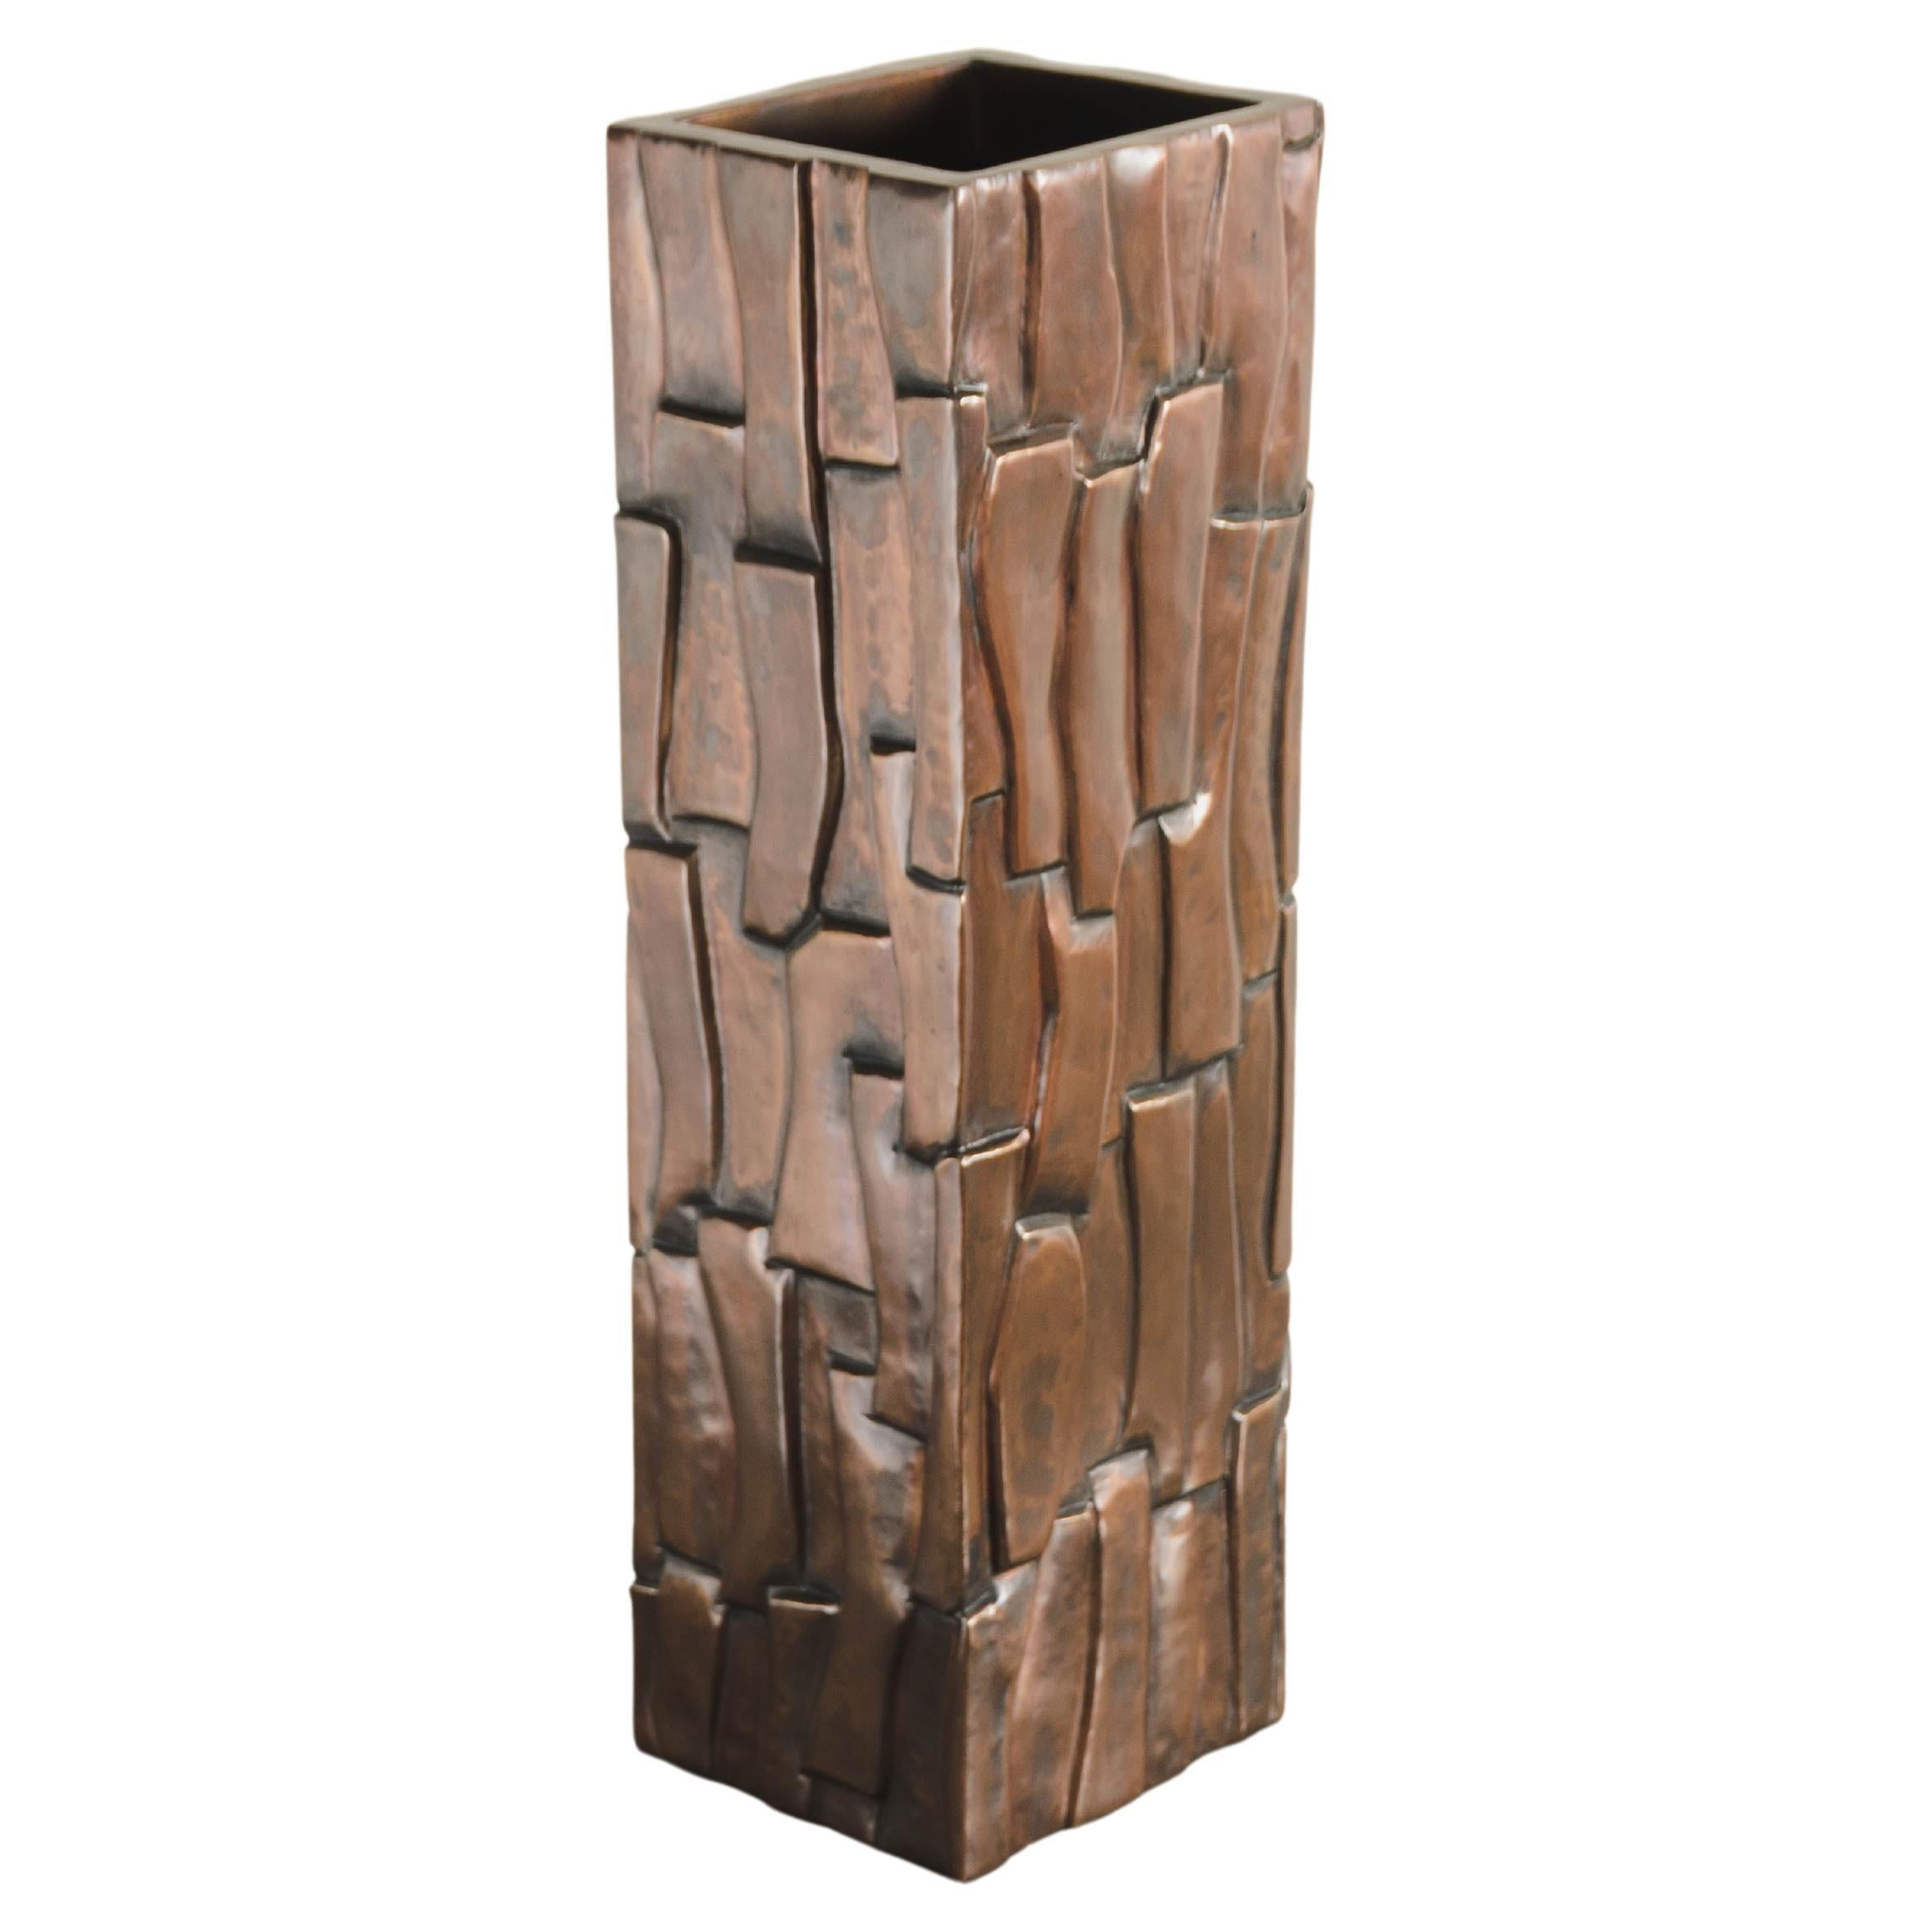 Contemporary Hand Repoussé Kuai Block Vase in Antique Copper by Robert Kuo